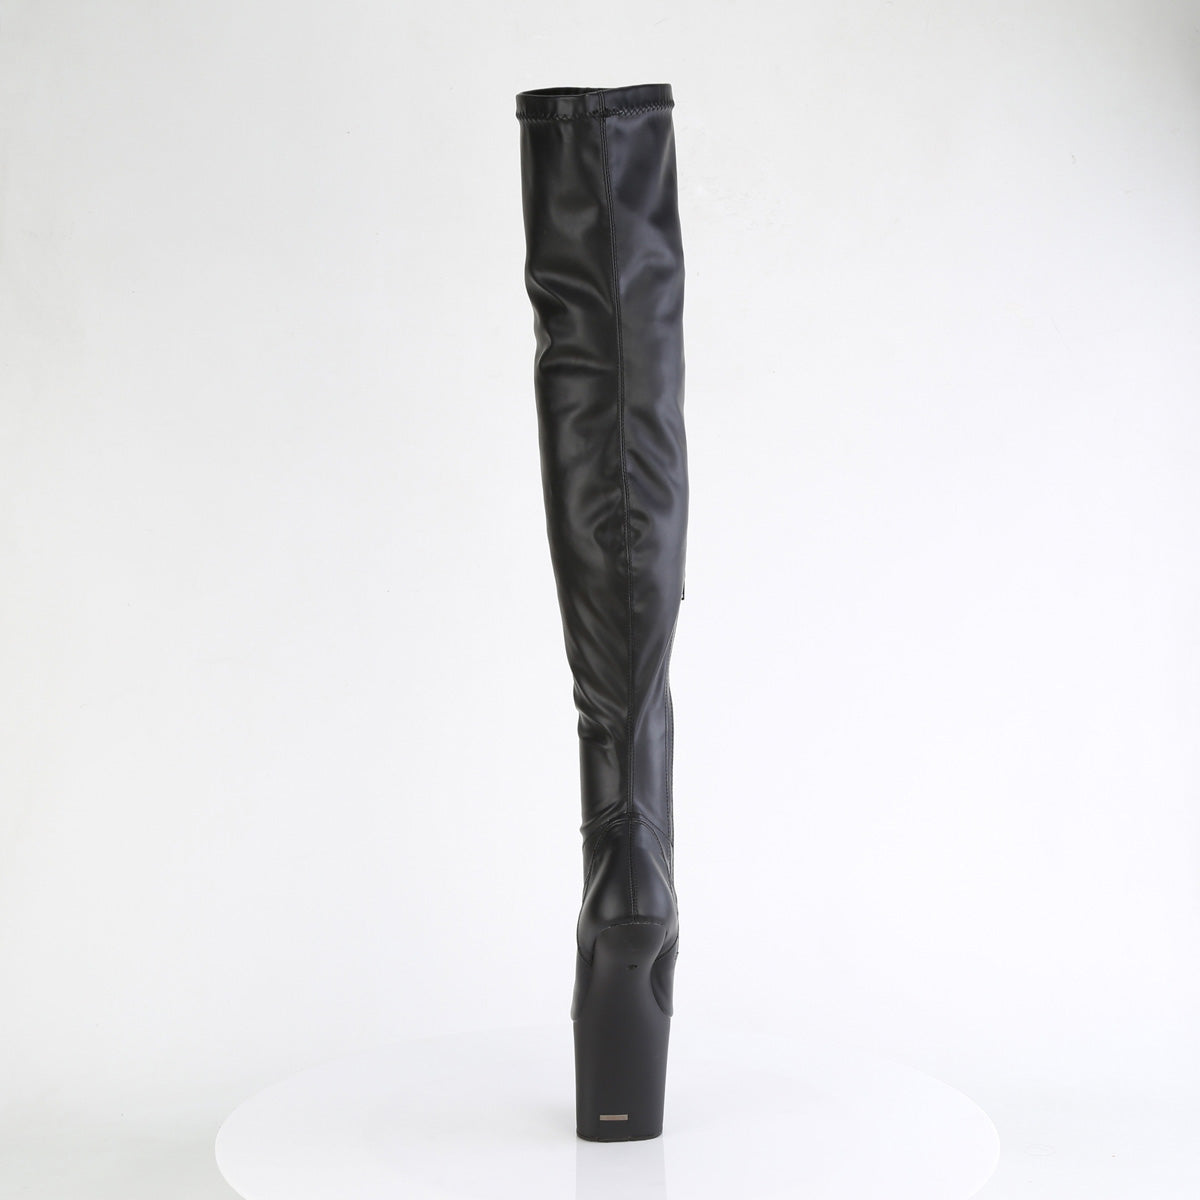 CRAZE-3000 Pleaser Black Faux Leather Thigh High Boots